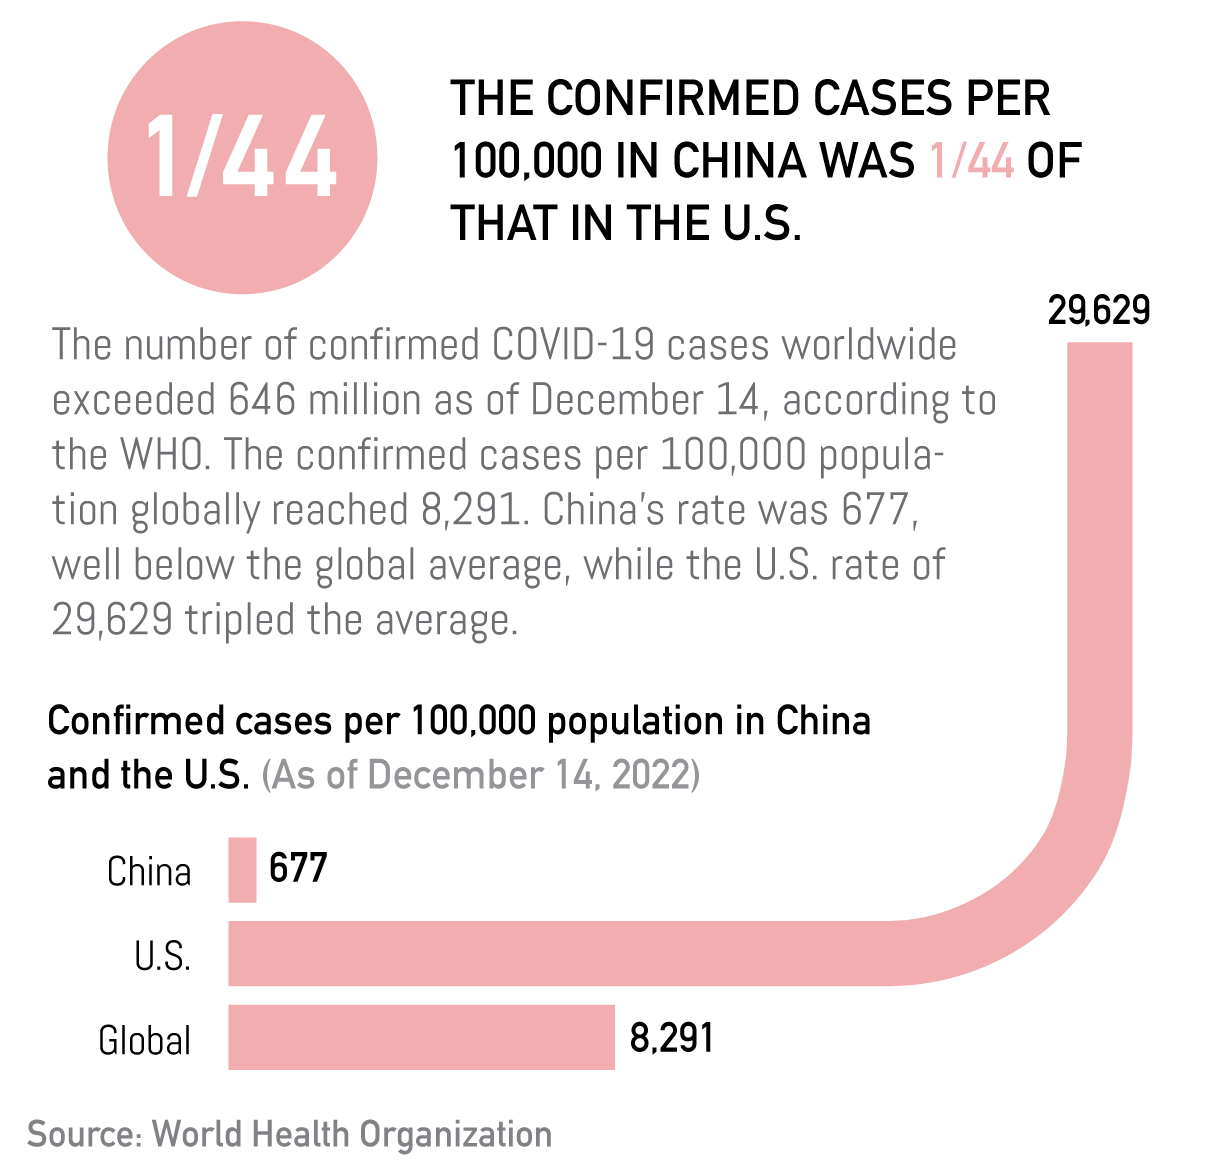 China's COVID-19 fight in numbers: China remains low rate on confirmed cases